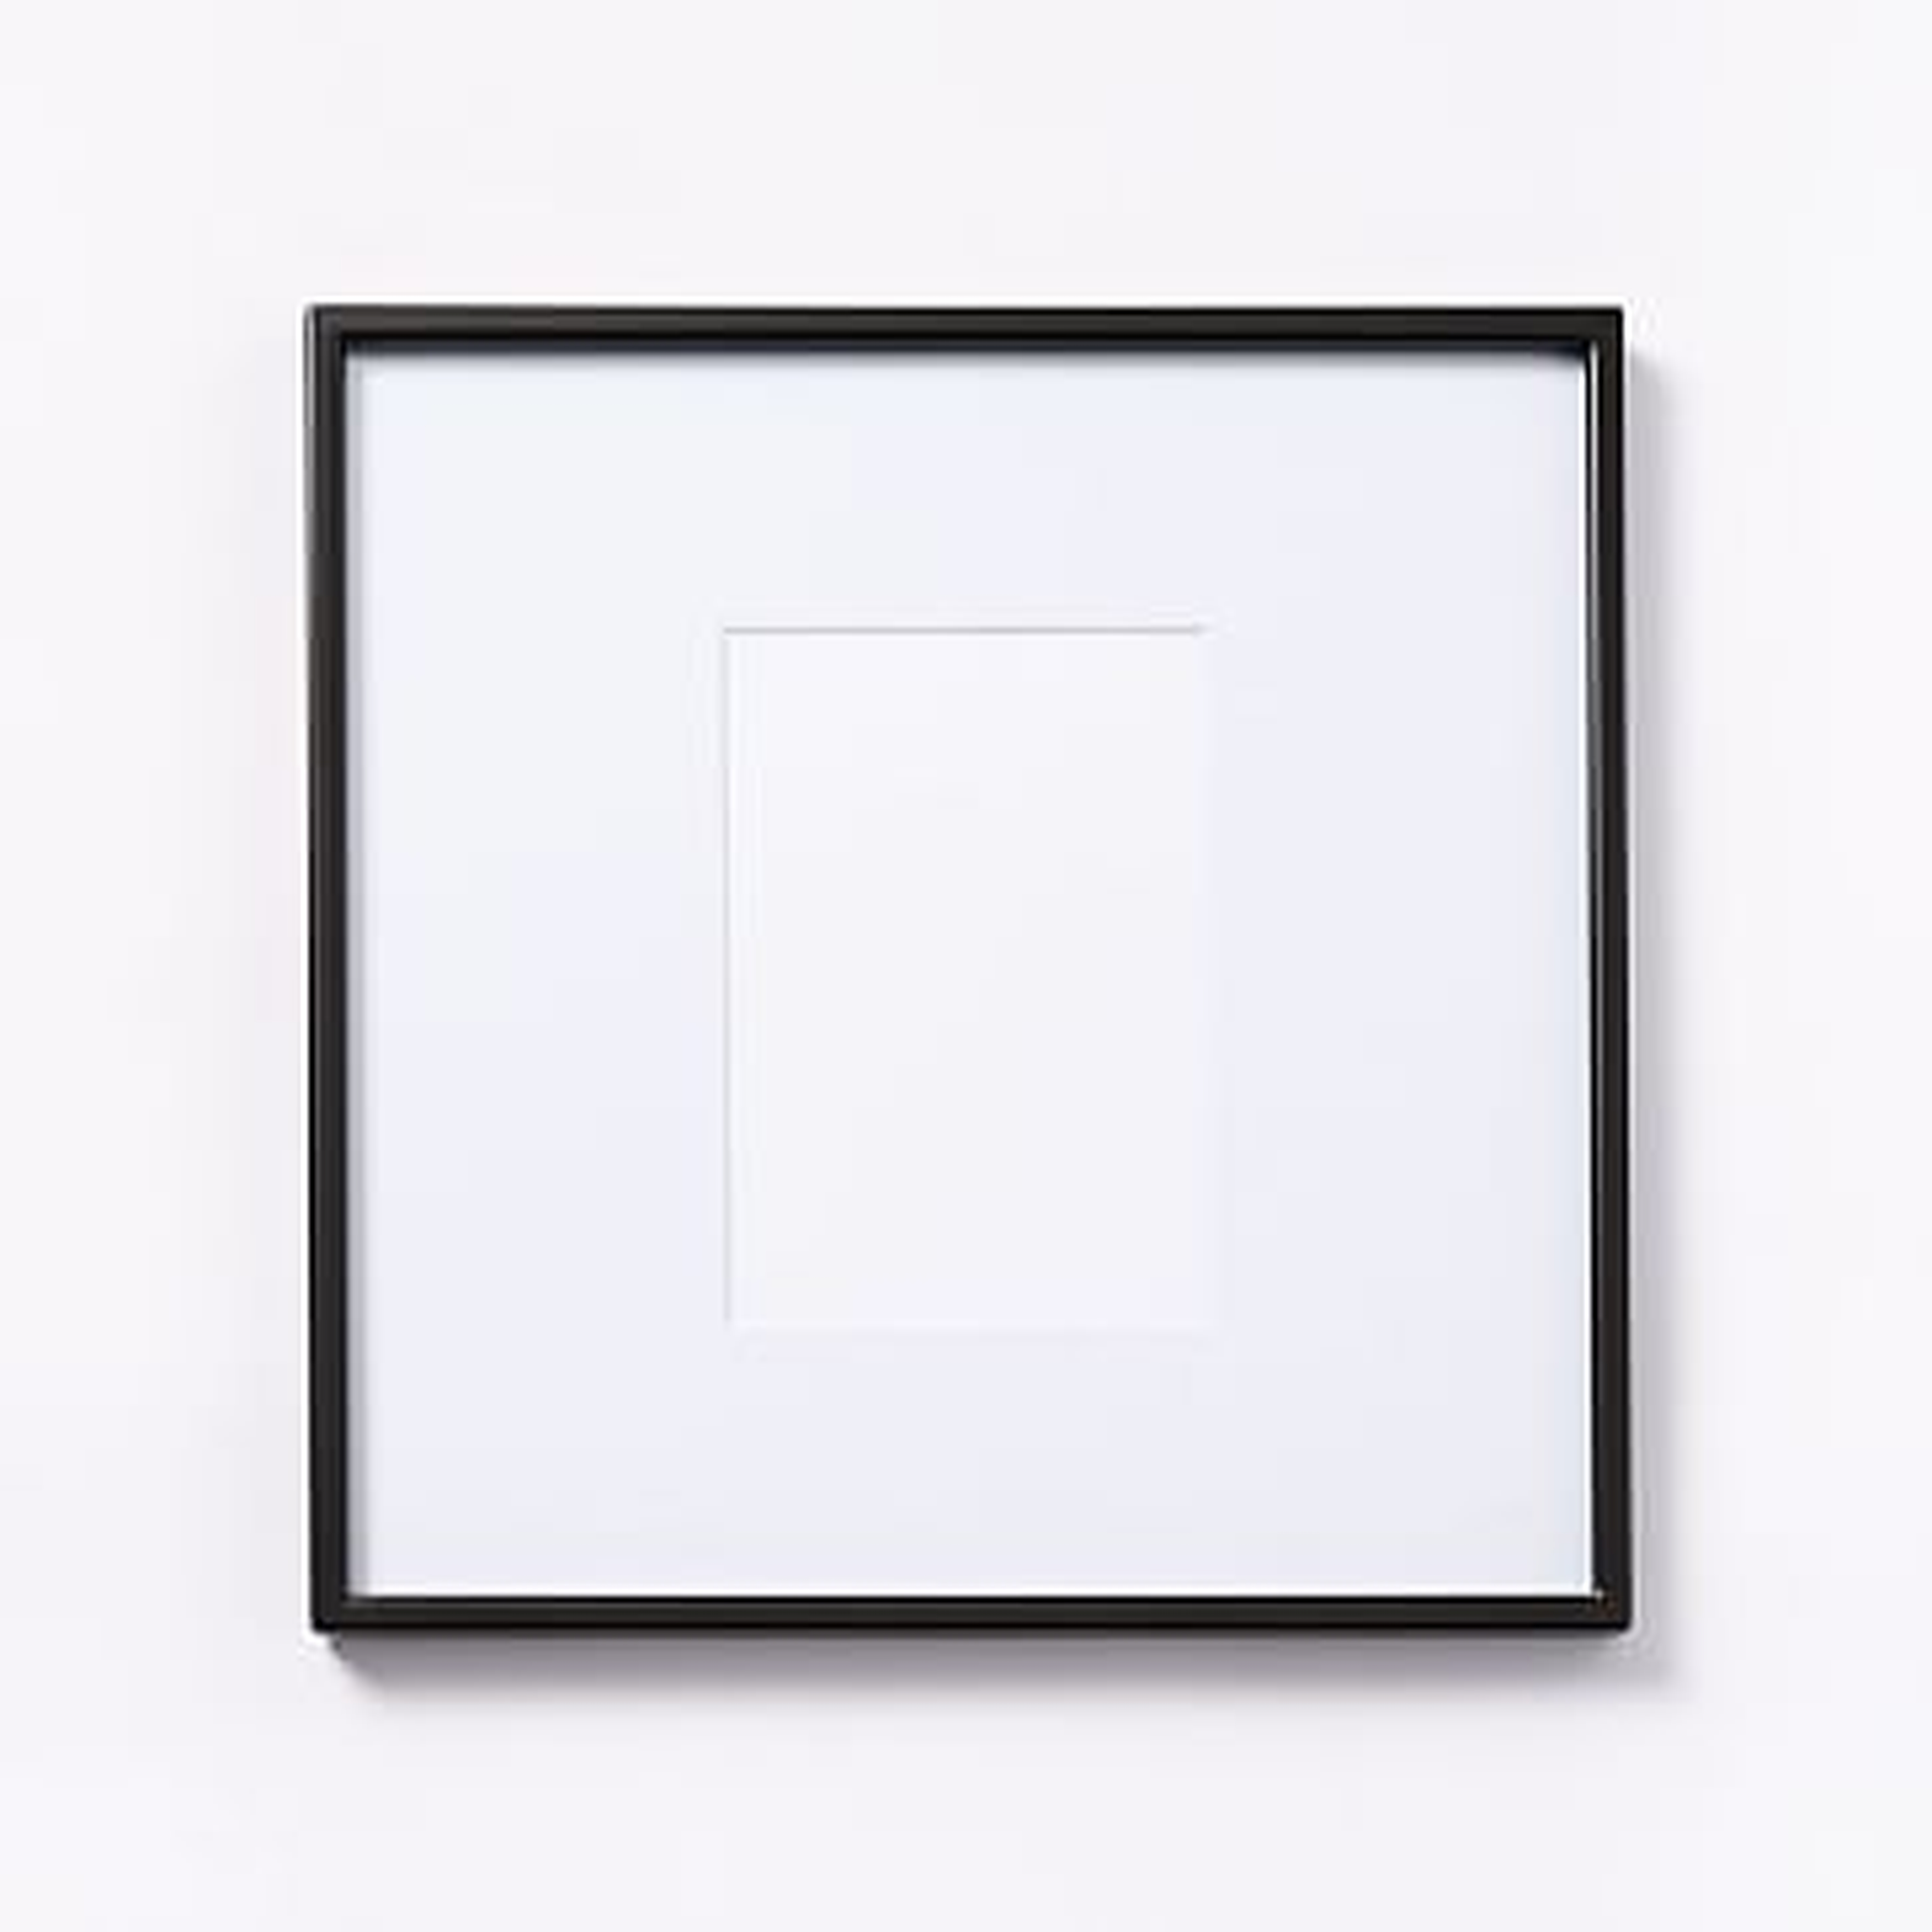 Gallery Frame, Antique Bronze, 5" x 7" (12" x 12" without mat) - West Elm